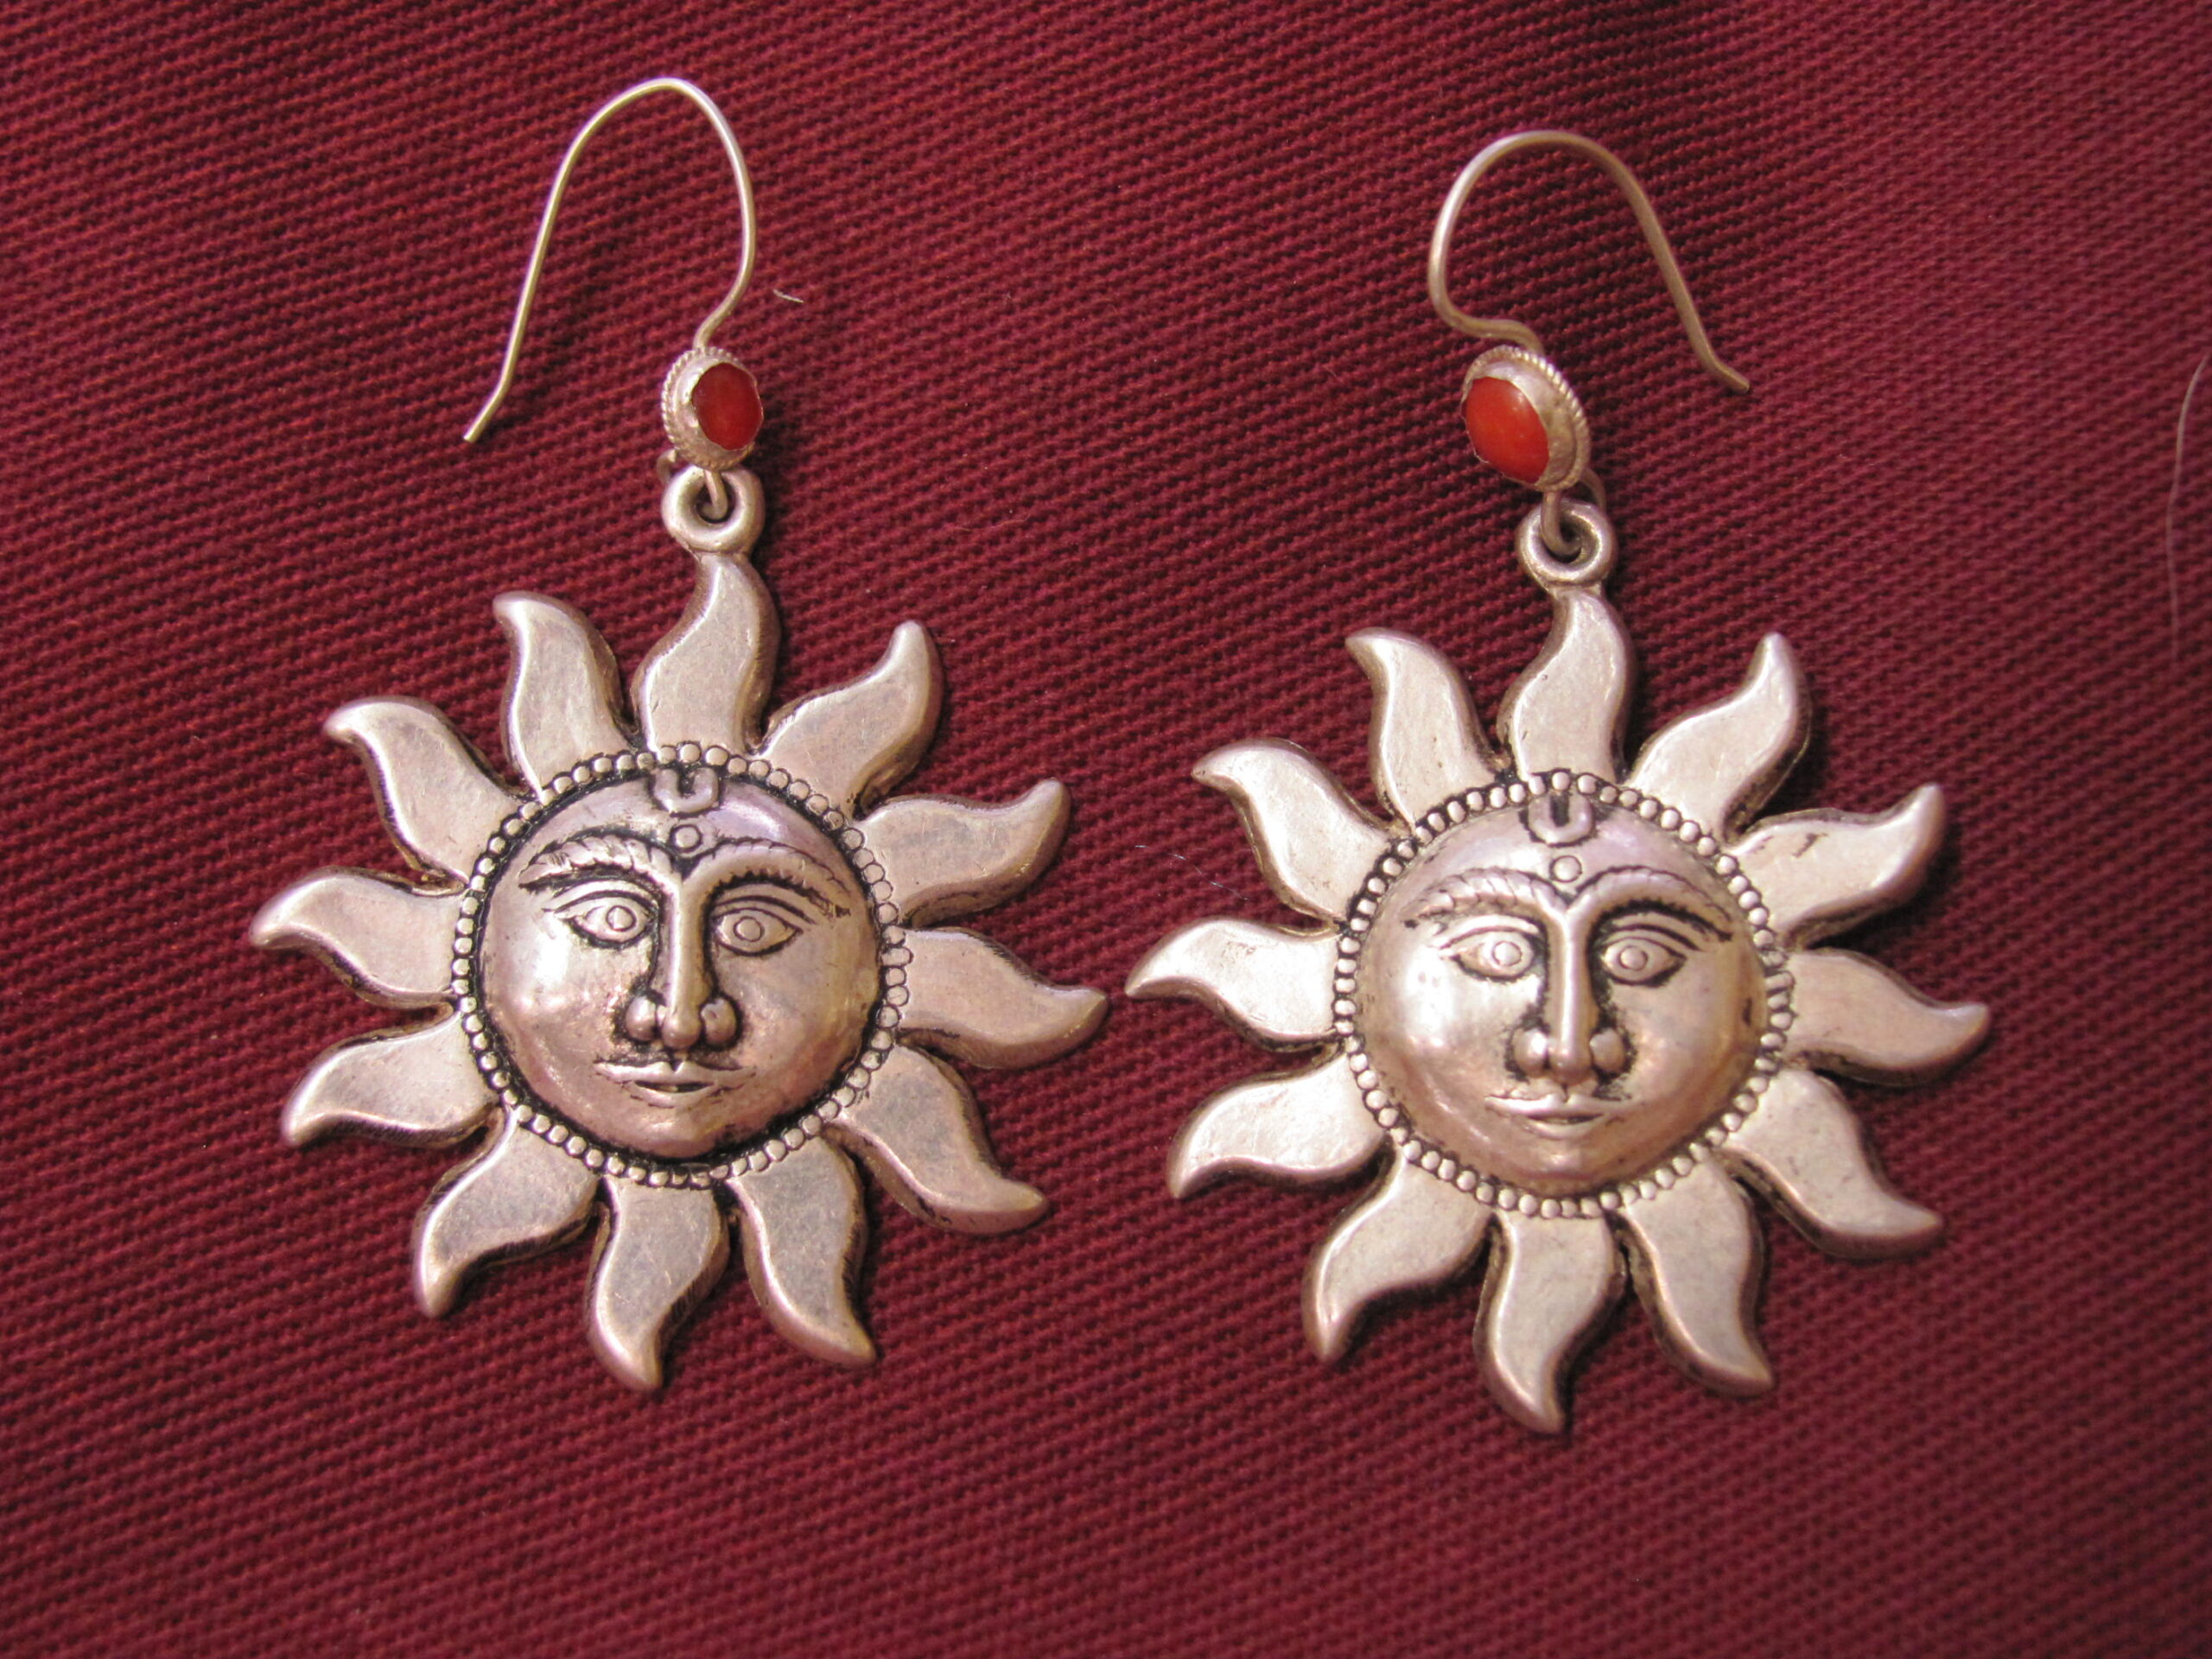 Discover 120+ large sun earrings super hot